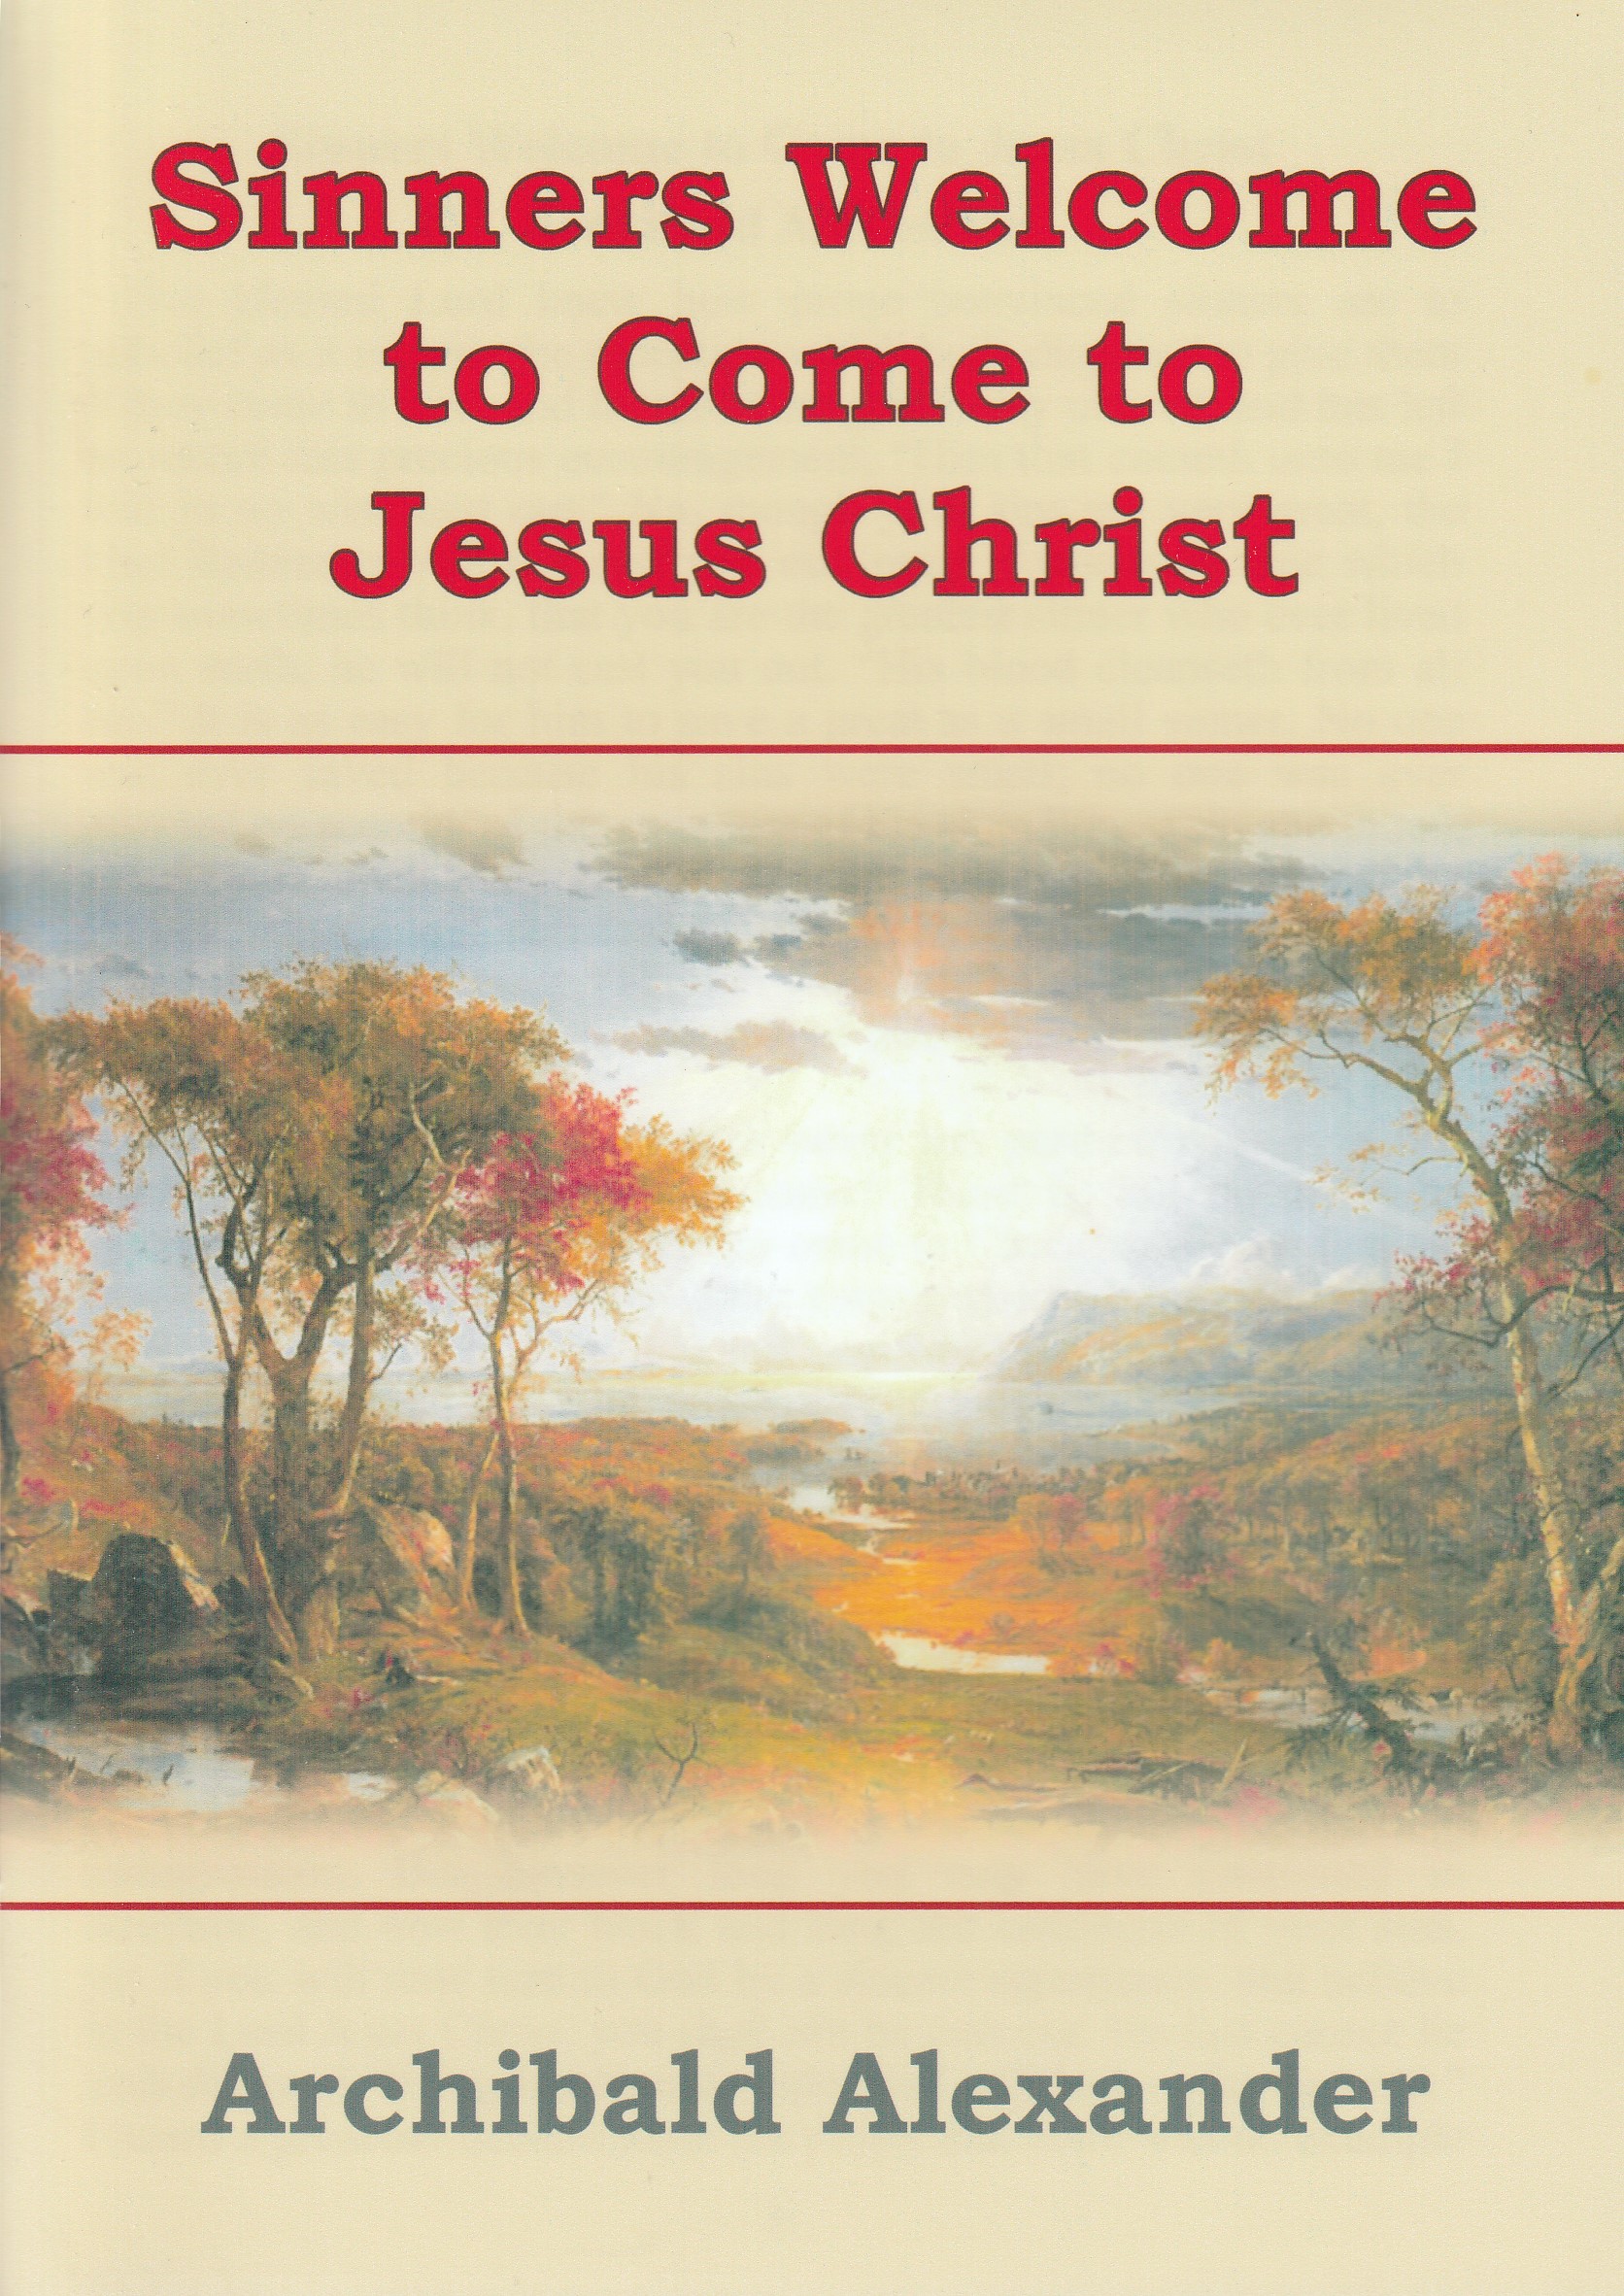 Sinners Welcome to Come to Jesus Christ